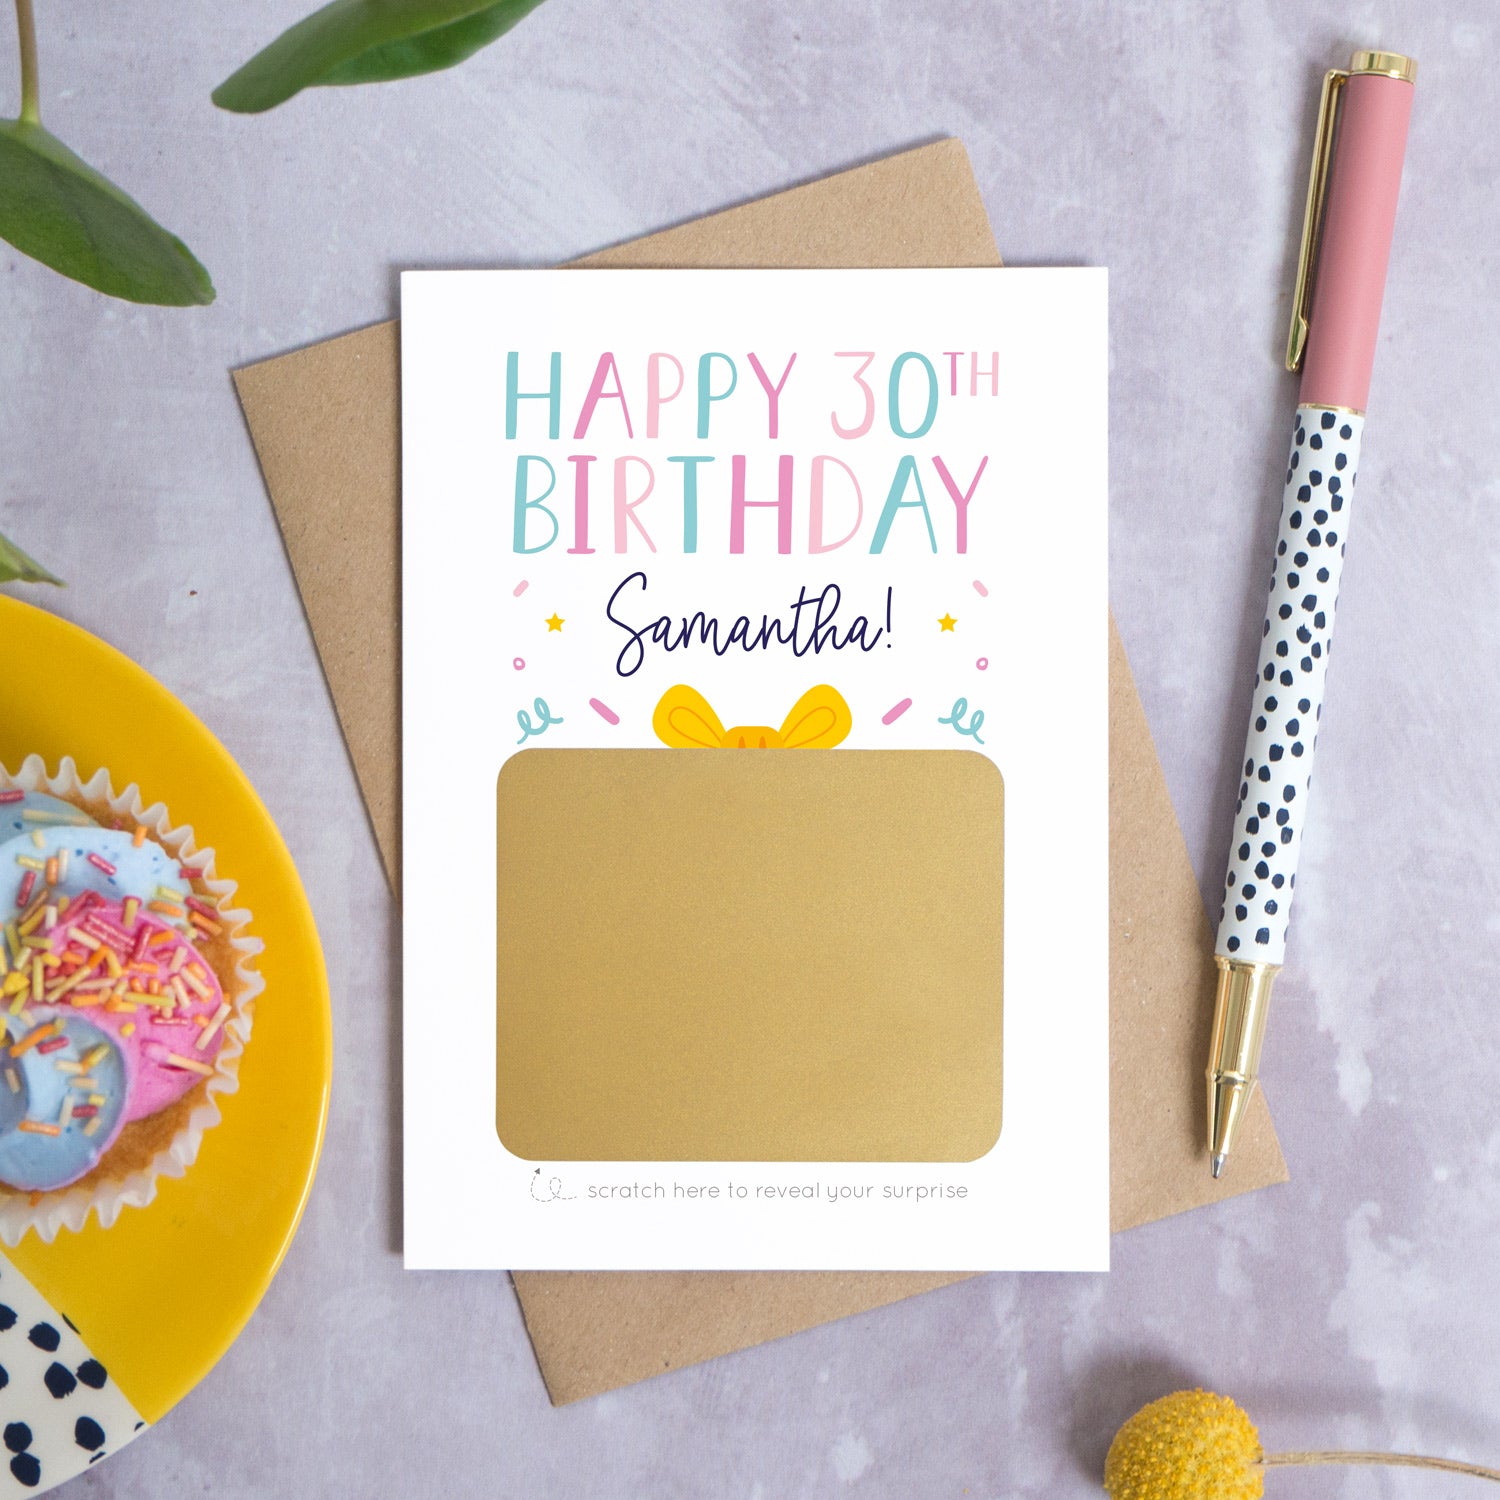 A personalised happy 30th birthday scratch card that has been photographed flat lay style on a grey concrete style background surrounded with foliage, a cupcake and a pen. The card itself shows how it will arrive and looks when it is completely unscratched.